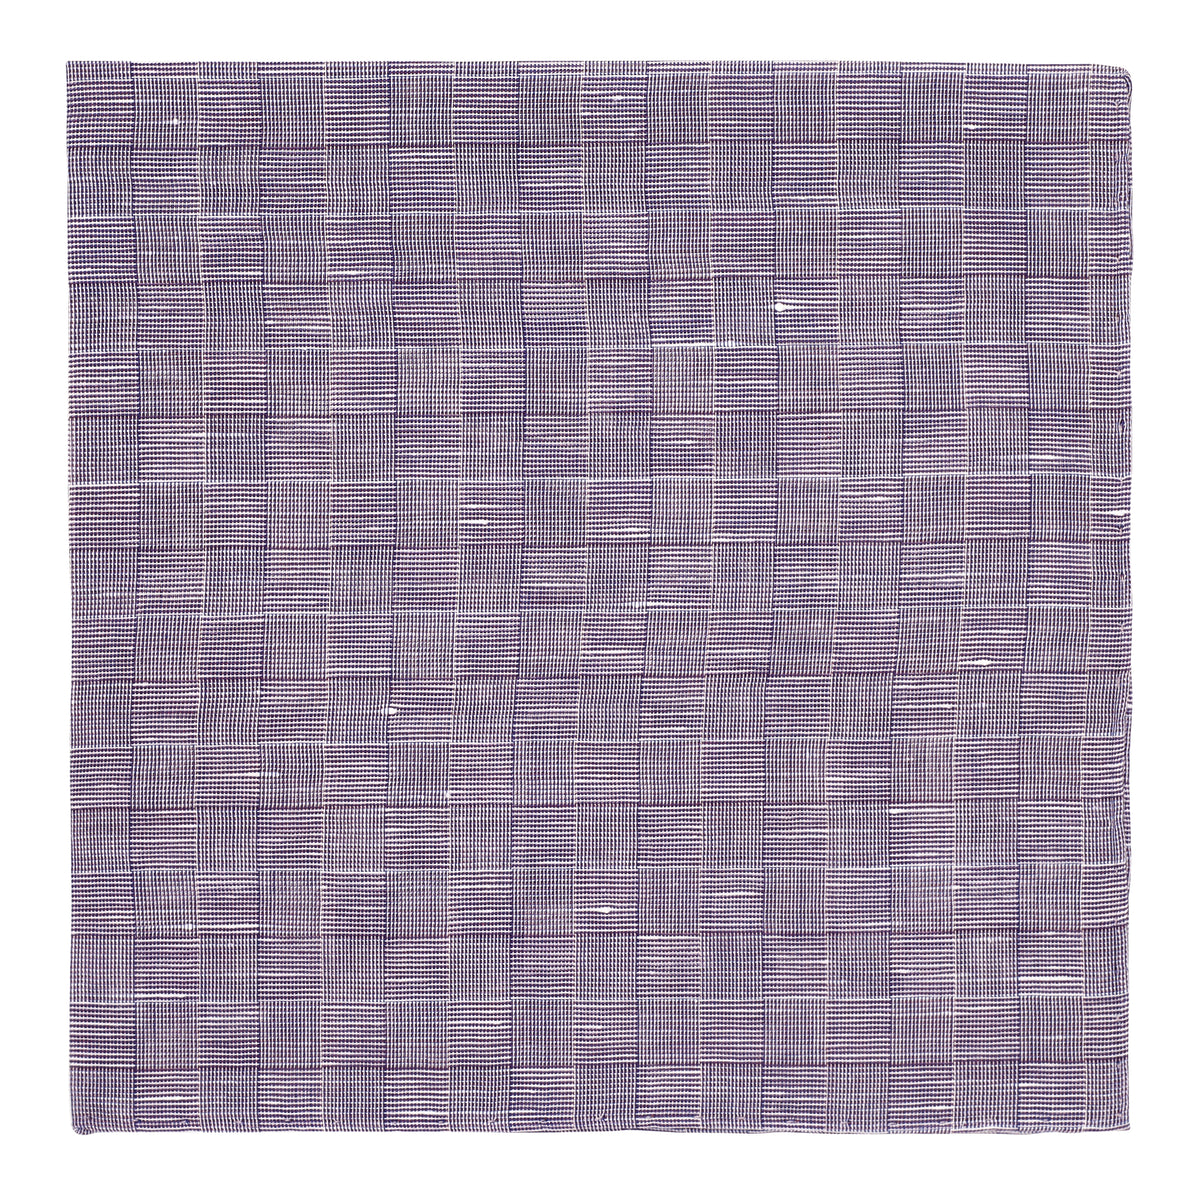 A Simonnot Godard Purple Pince de Galles Pocket Square on a white background with visual texture, available at KirbyAllison.com.